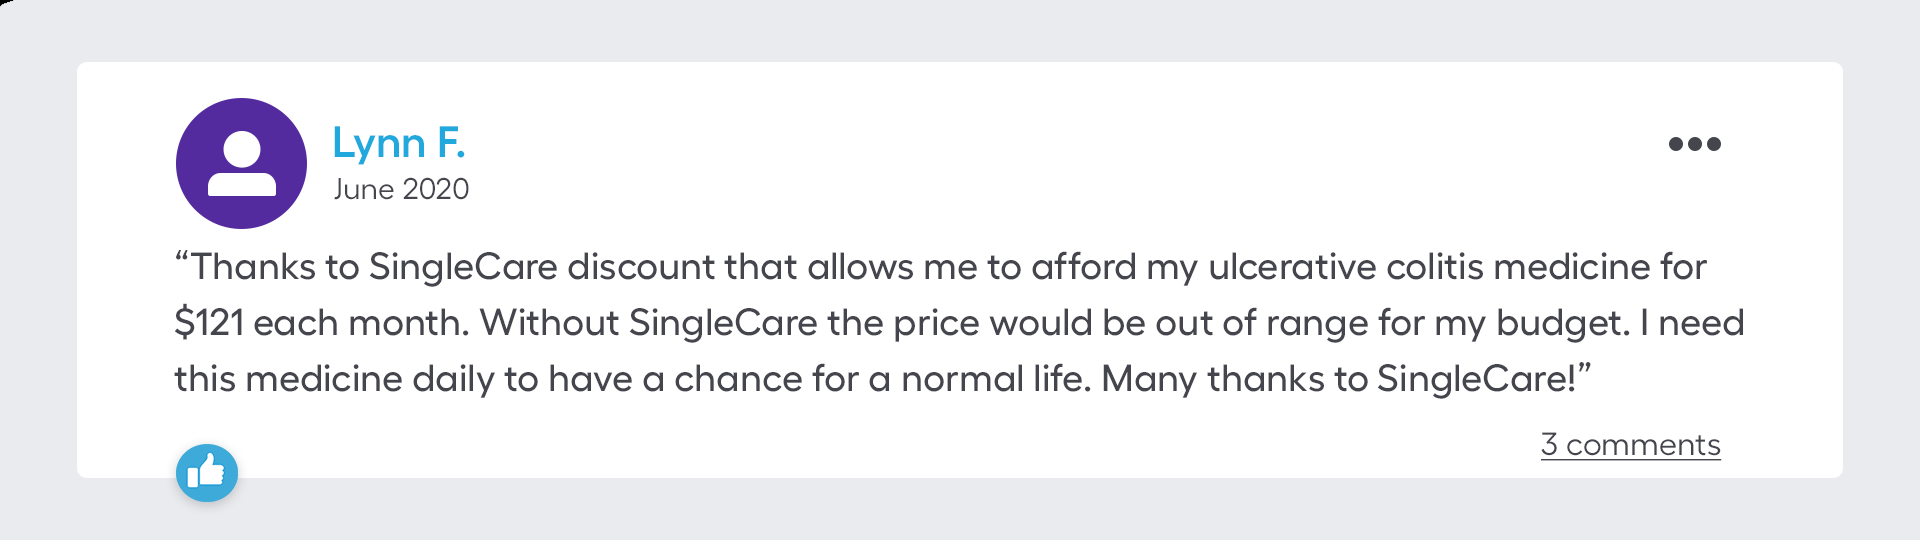 Thanks to SingleCare discount that allows me to afford my ulcerative colitis medicine for $121 each month. Without SingleCare the price would be out of range for my budget. I need this medicine daily to have a chance for a normal life. Many thanks to SingleCare!